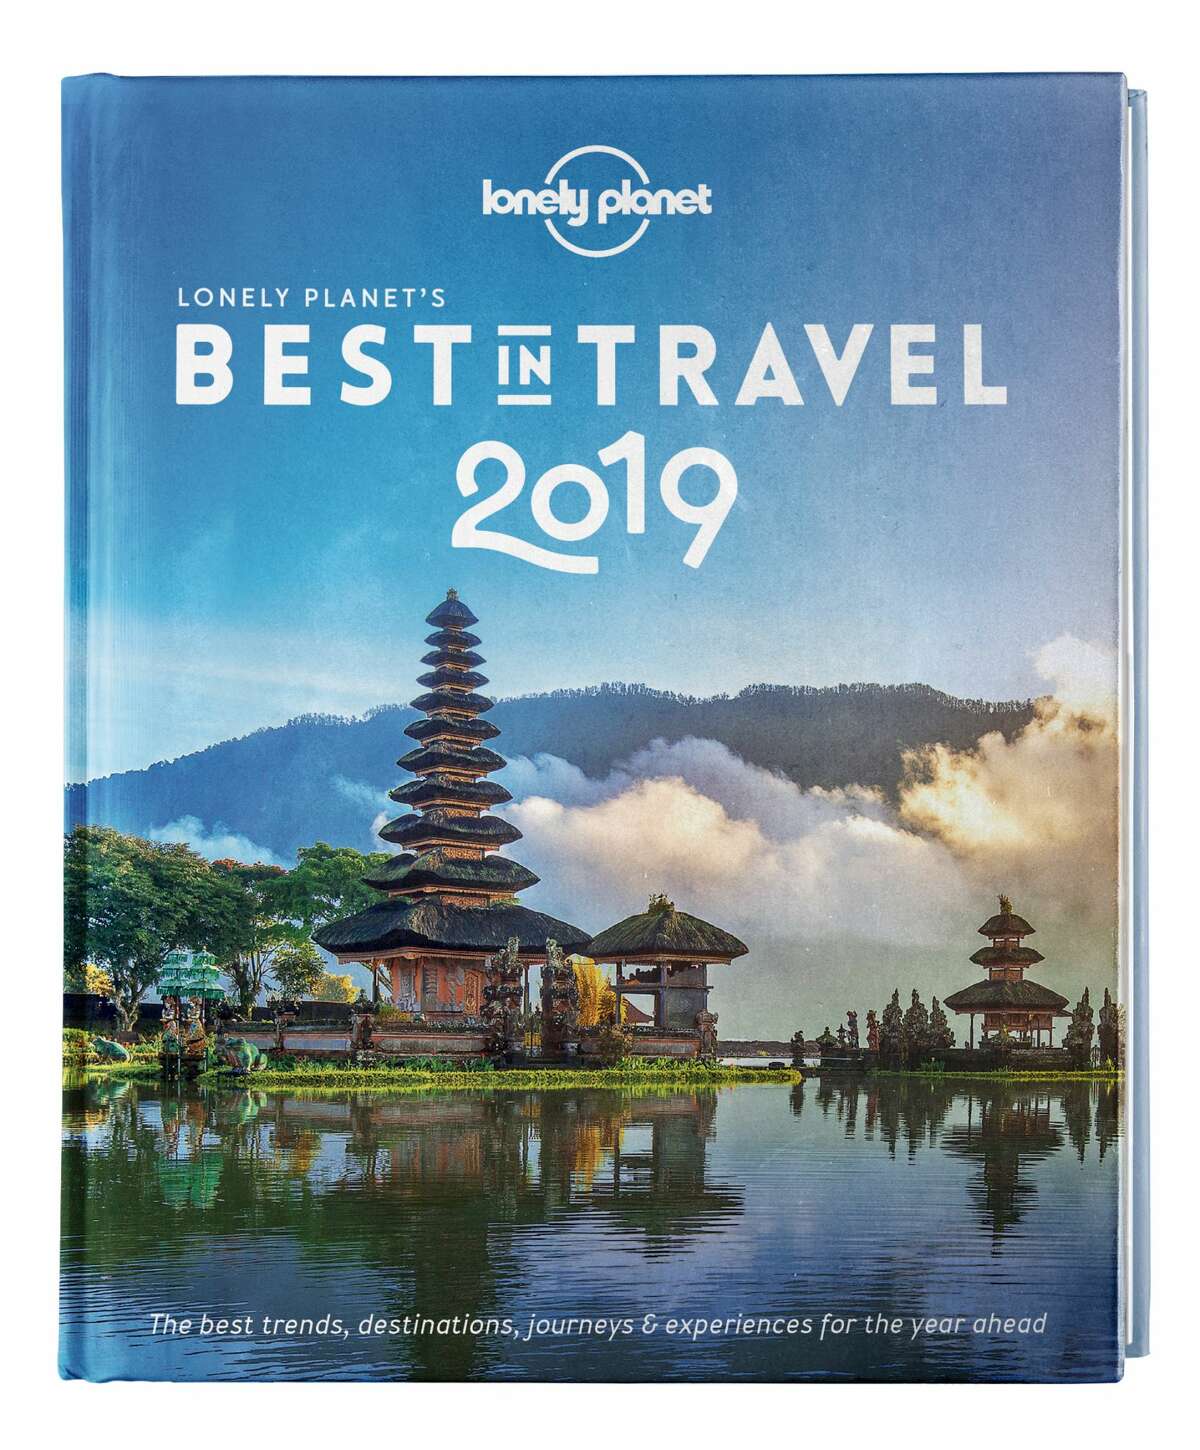 "Best in Travel" is an annual publication that gives travelers an idea of where they should visit. Criteria include any celebrations or anniversaries, infrastructure improvements and energy, Editor Alex Howard said.